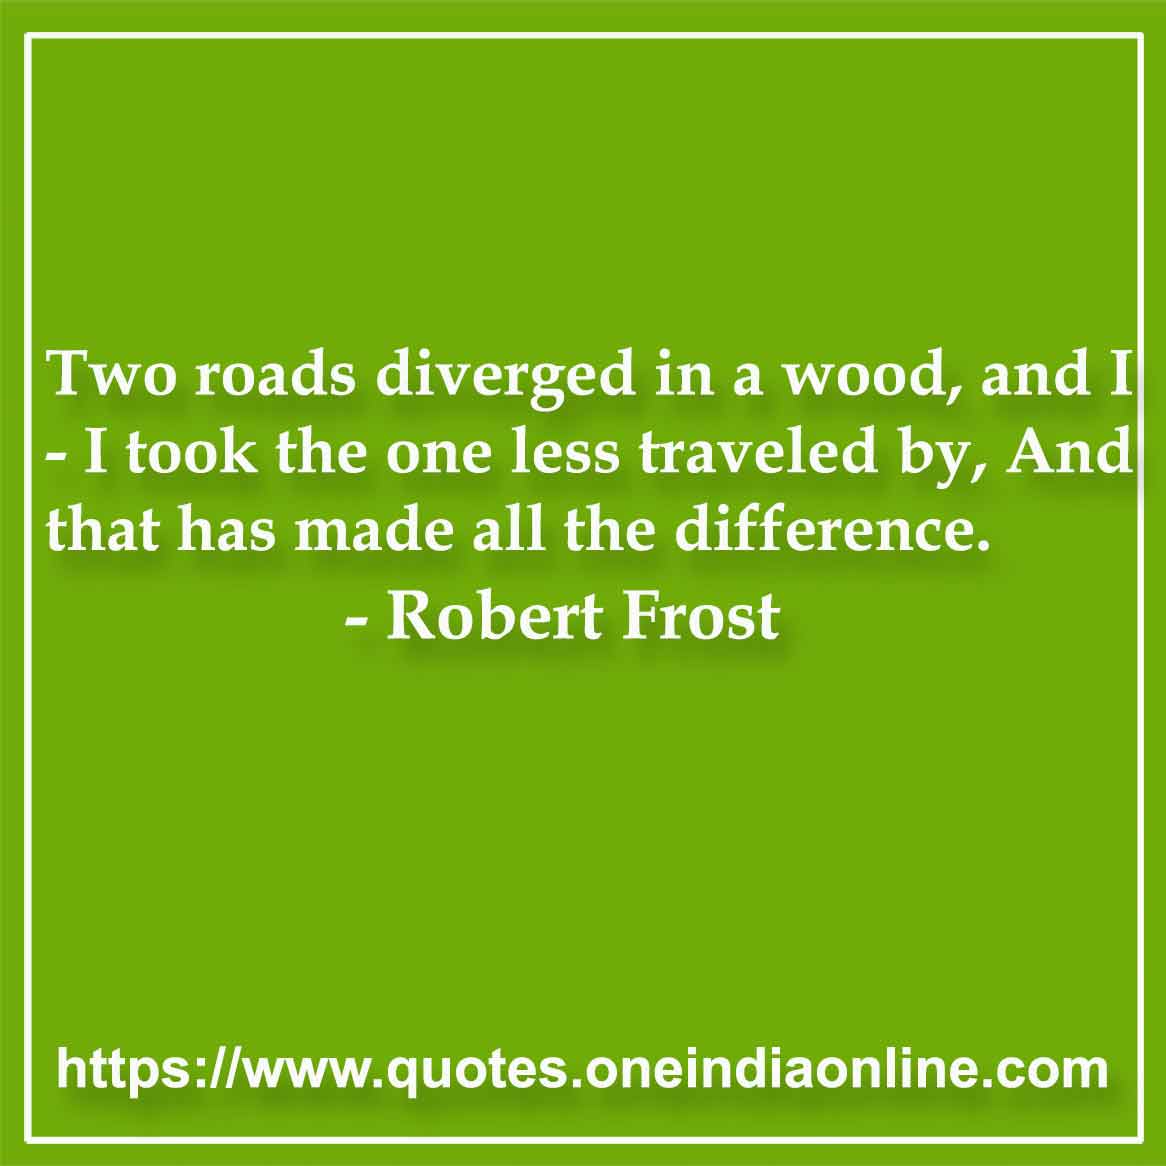 Two roads diverged in a wood, and I - I took the one less traveled by, And that has made all the difference. 

-  Robert Frost